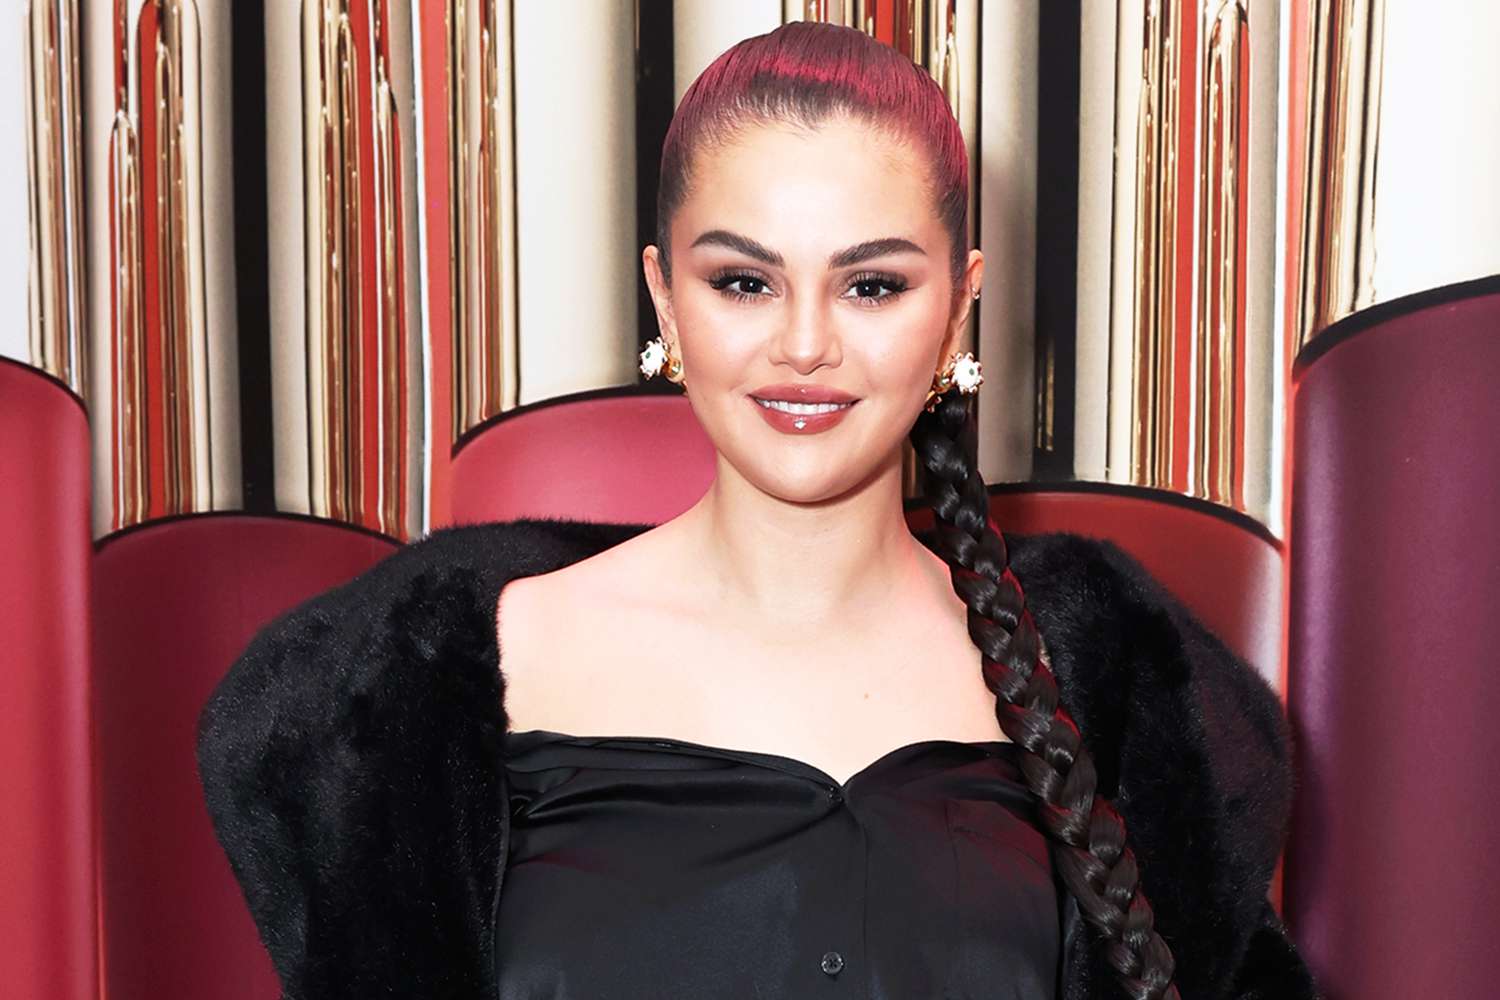 Selena Gomez Shuts Down Rumors That She's Selling Rare Beauty: 'The Possibilities Are Endless'